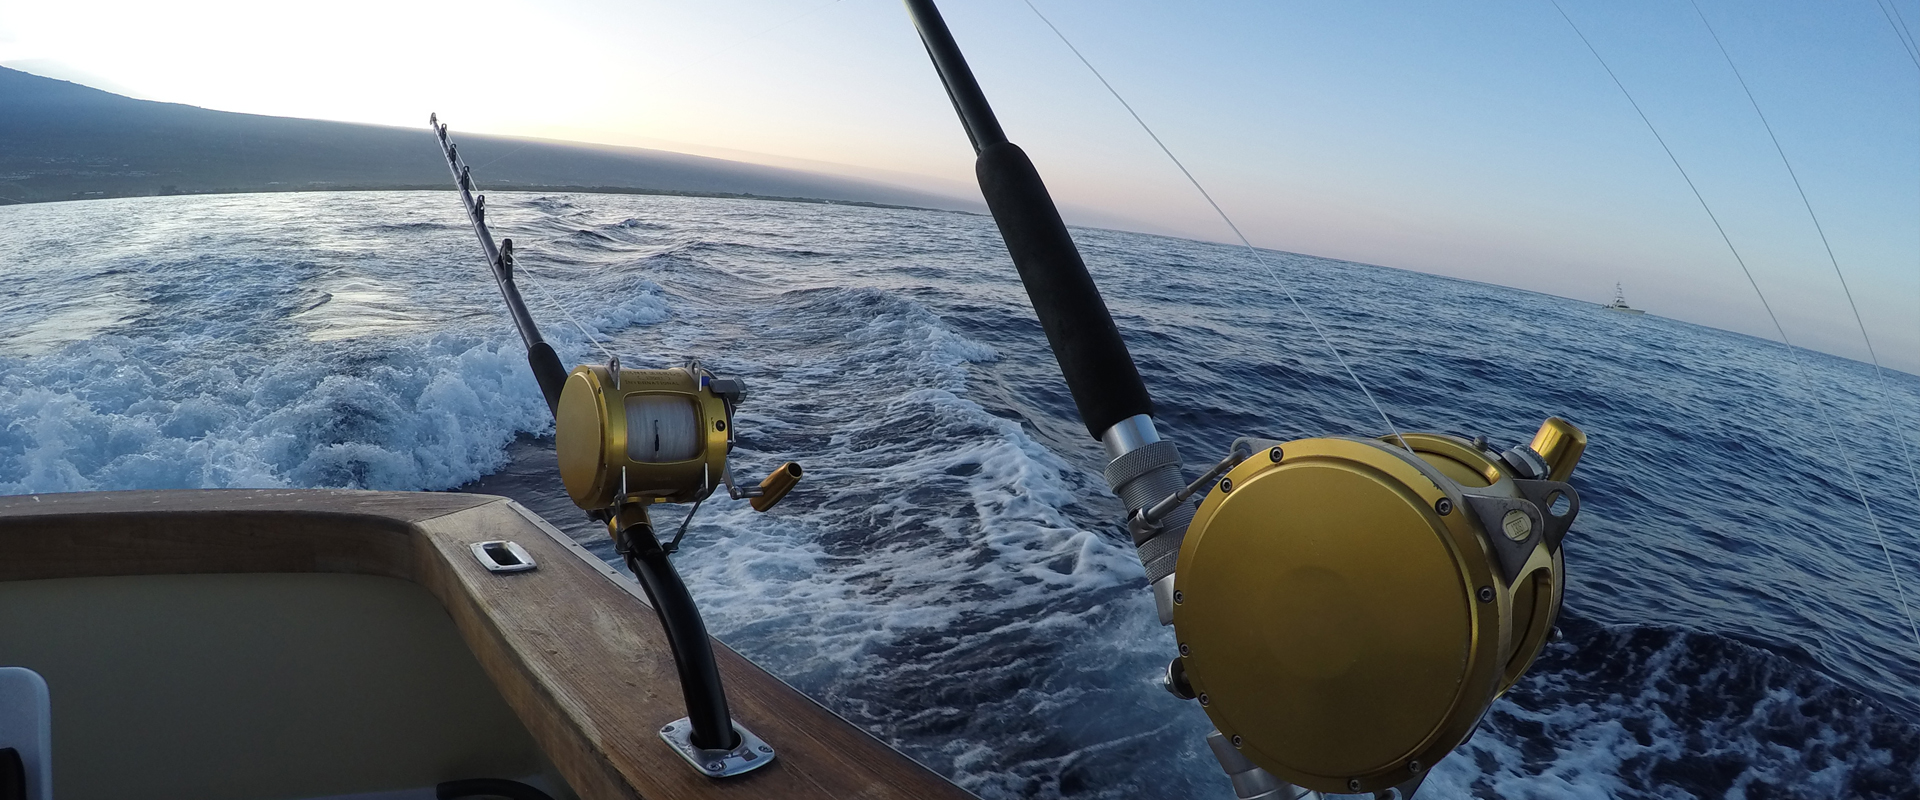 Image of Kona Hawaii from offshore fishing boat